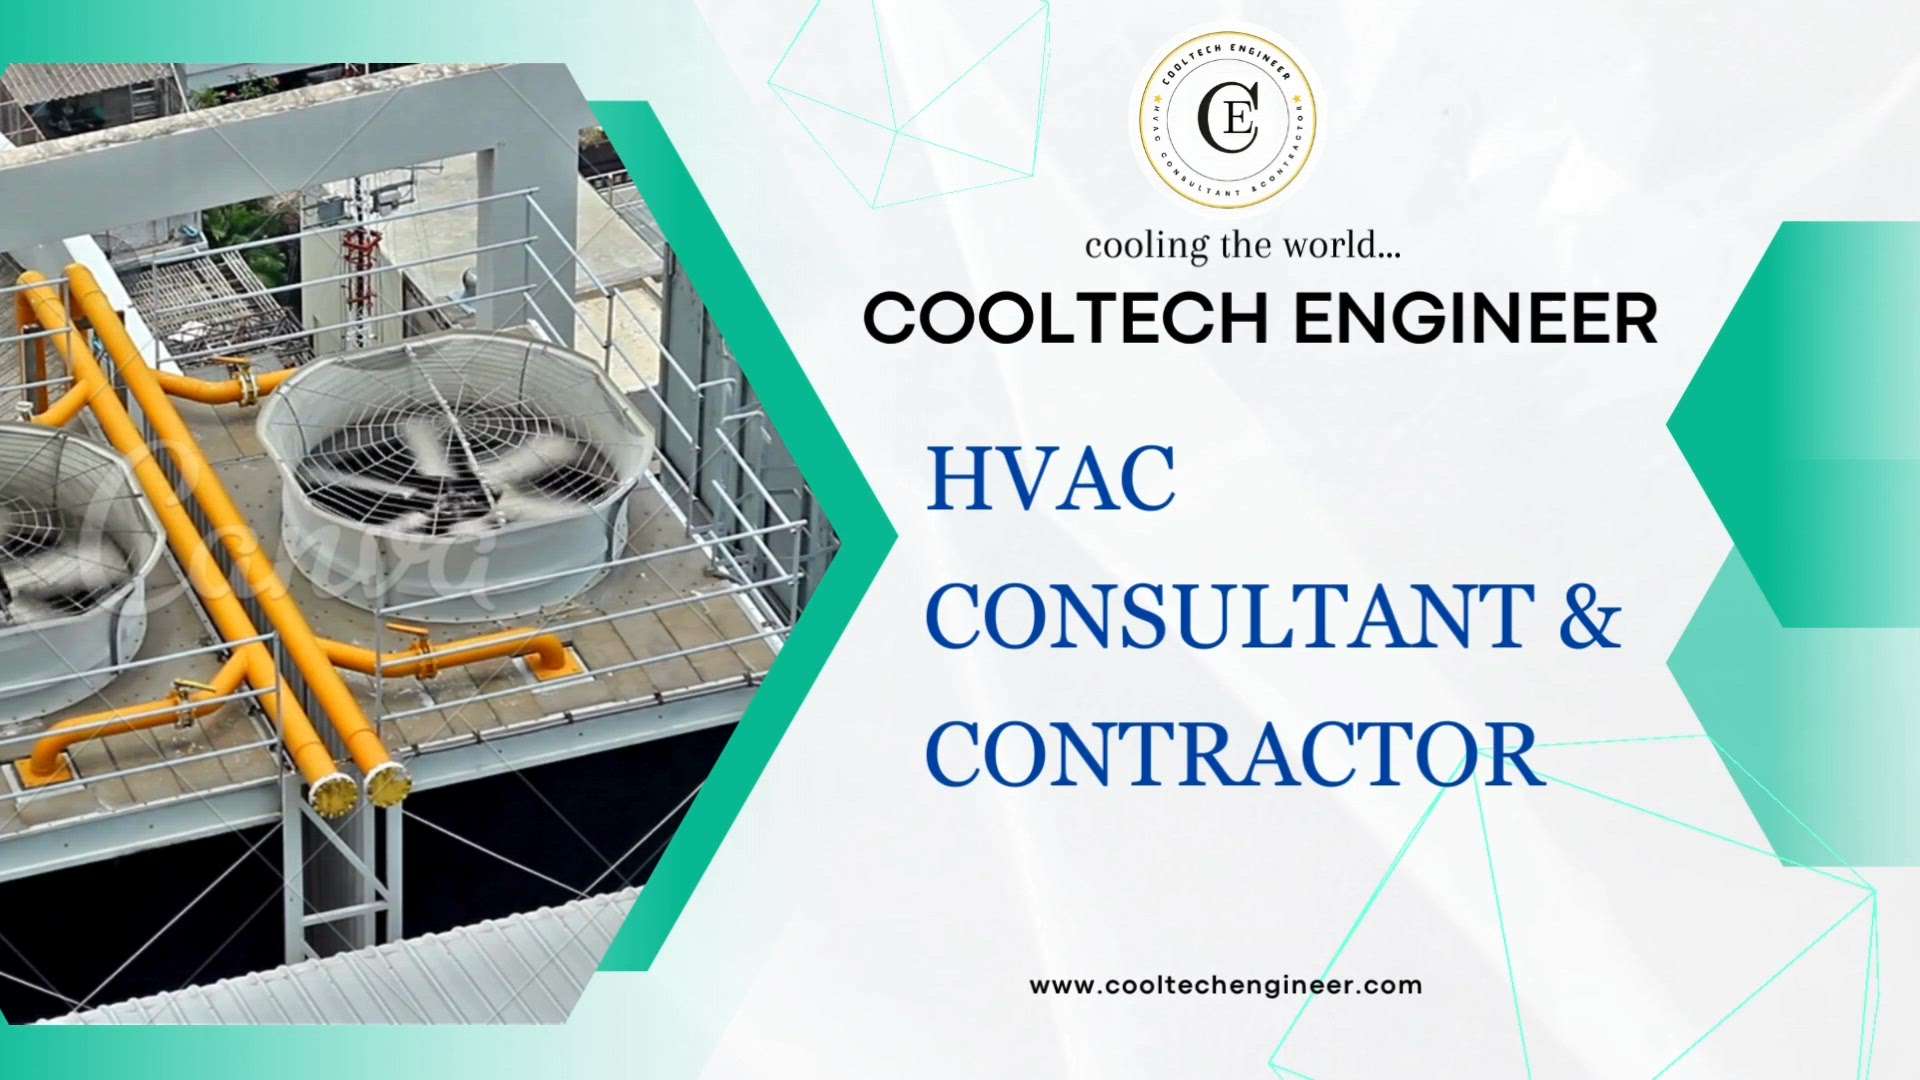 CoolTech Engineers We are the industry leading HVAC consultants and contractors. Our team of experienced and knowledgeable professionals offers a range of products and services tailored to your needs. From custom design and installation to maintenance and repairs, we have the expertise to get the job done right. Don't wait any longer to get the comfort and  convenience you deserve. Contact us today to discuss how we can help you!
 #Architect  #architecturedesigns  #Architectural&Interior  #arctechture  #InteriorDesigner  #Interlocks  #InteriorDesigner  #consultingproject  #CalicutConstructions&Consultants  #consultantinterior  #contruction